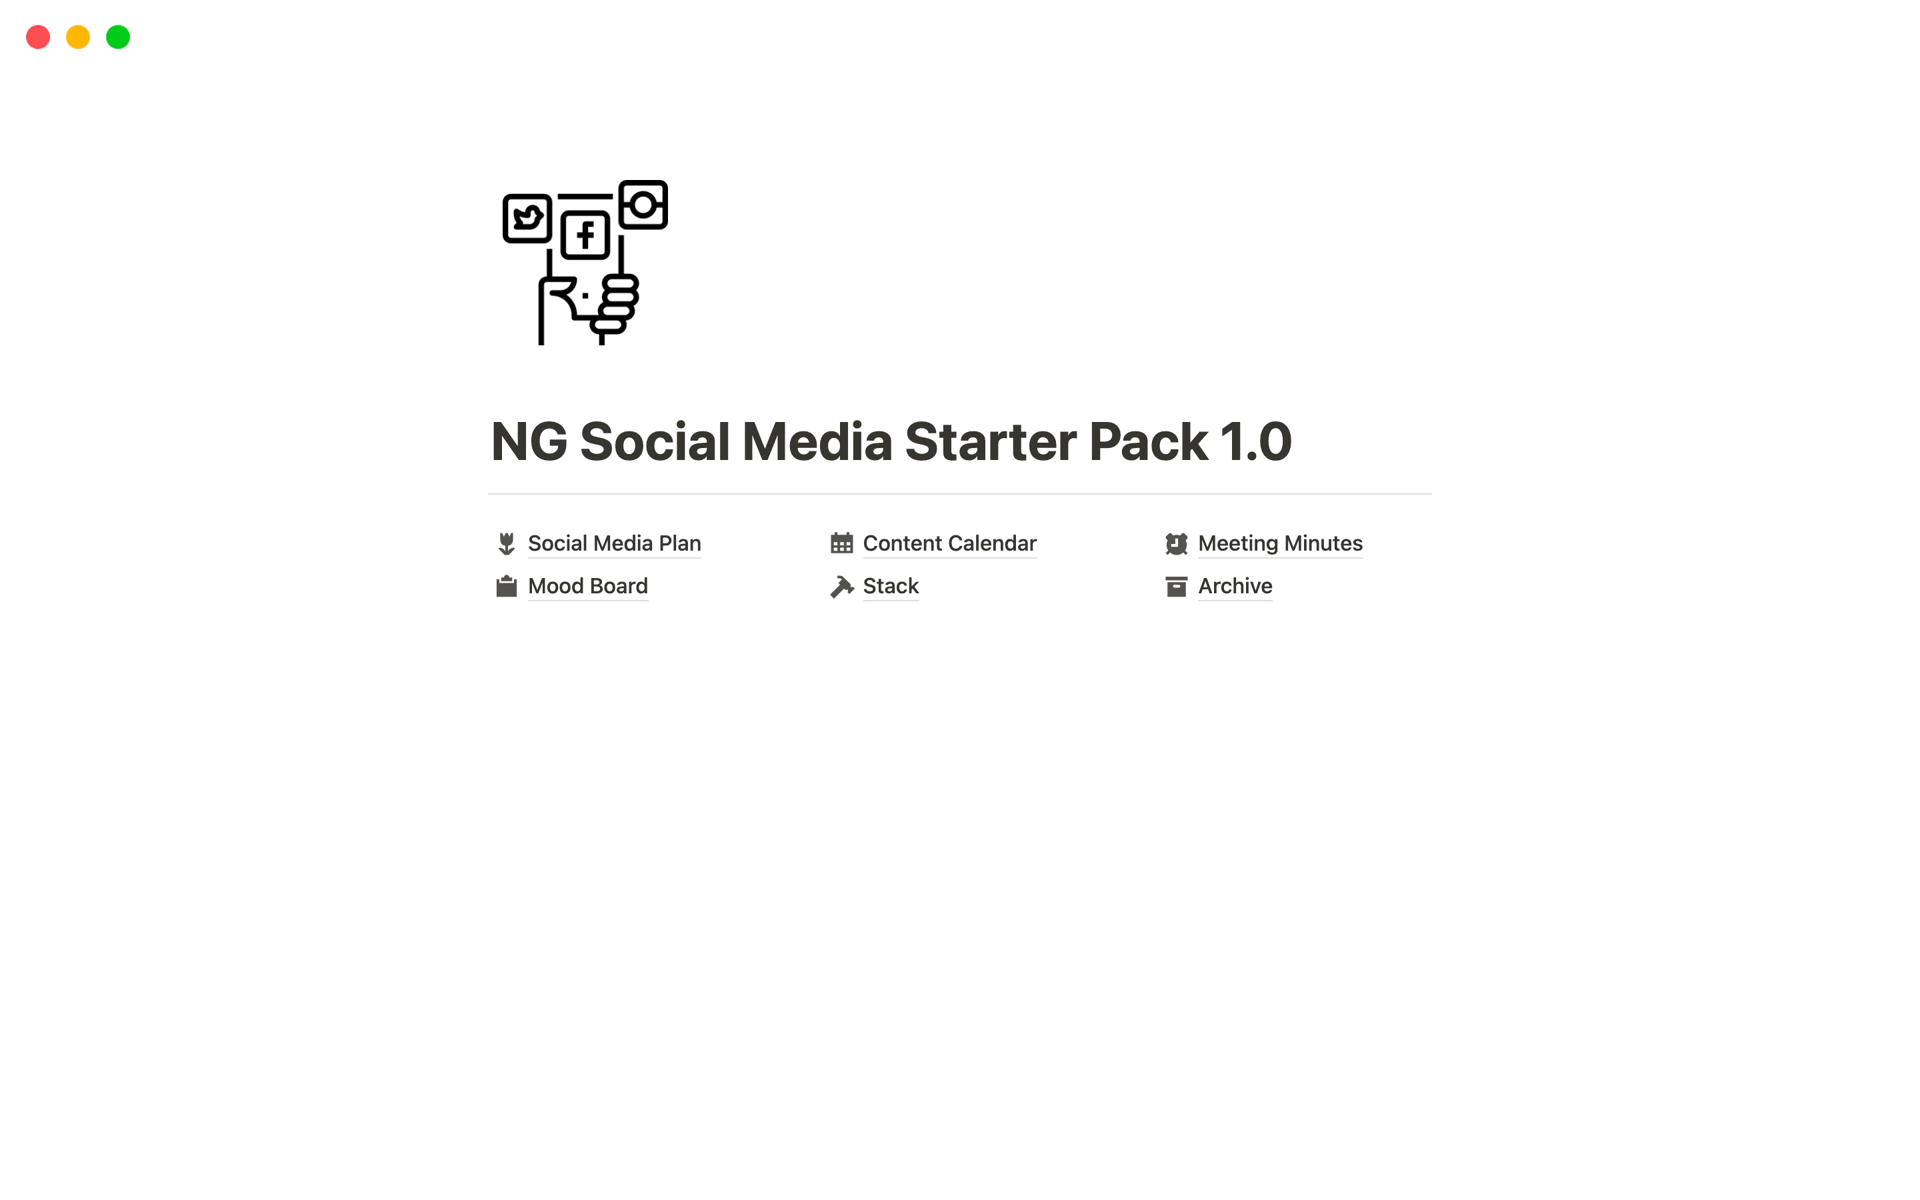 NG Social Media Starter Pack 1.0 is a simple social media management kit that helps you plan, automate and navigate social media with ease as a business person or social media manager.